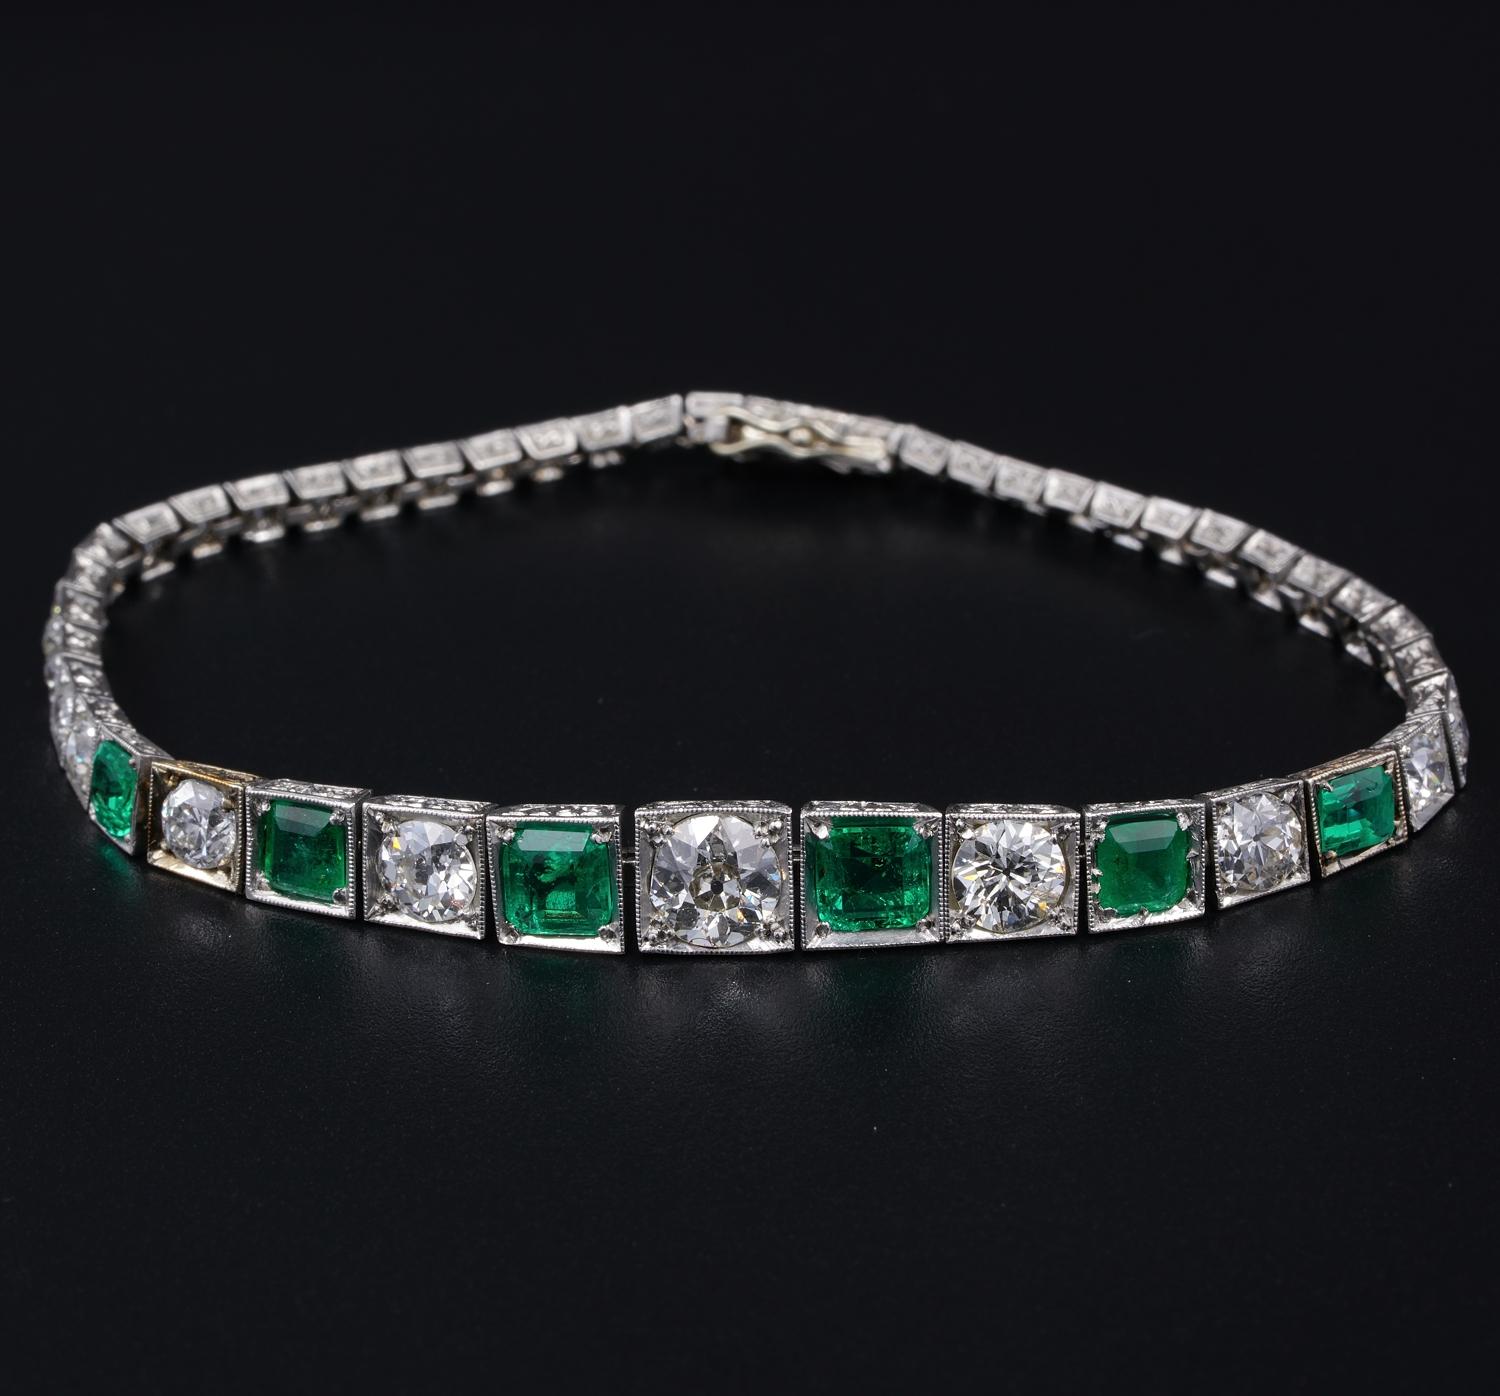 hings of Beauty Will Please for Ever!

Early Art Deco signature piece of the 1915 ca
All solid Platinum hand made during that short historical era
Sheer Luxury made as for exclusive crafting, rarest gemstone on earth and Platinum material